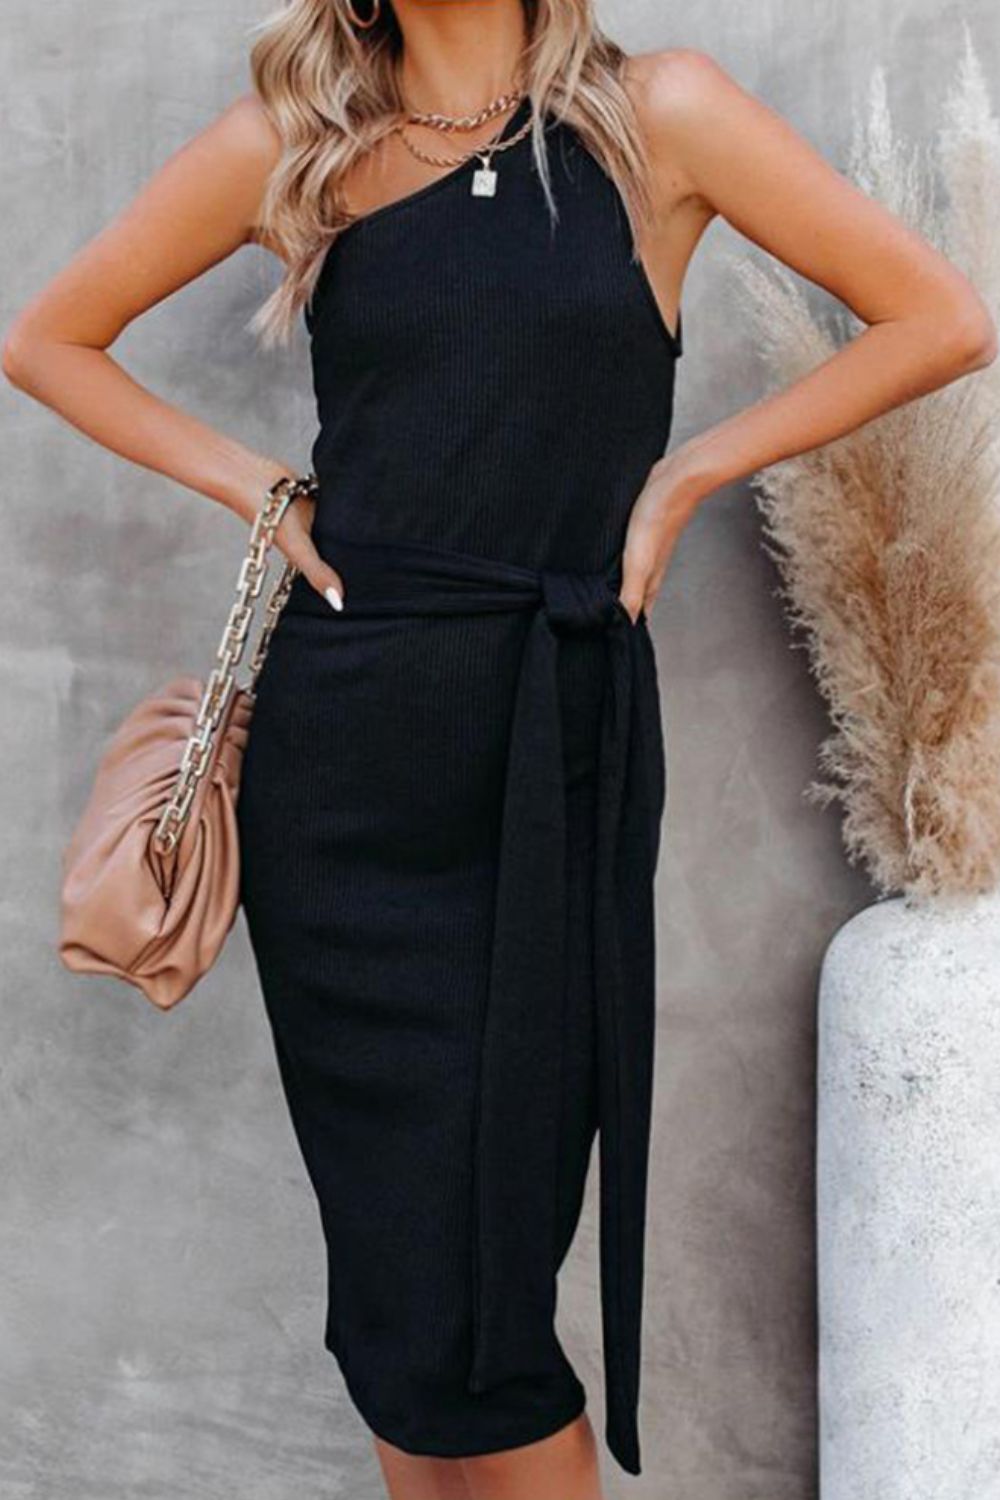 Tie Front One-Shoulder Sleeveless Dress - Fashion Girl Online Store